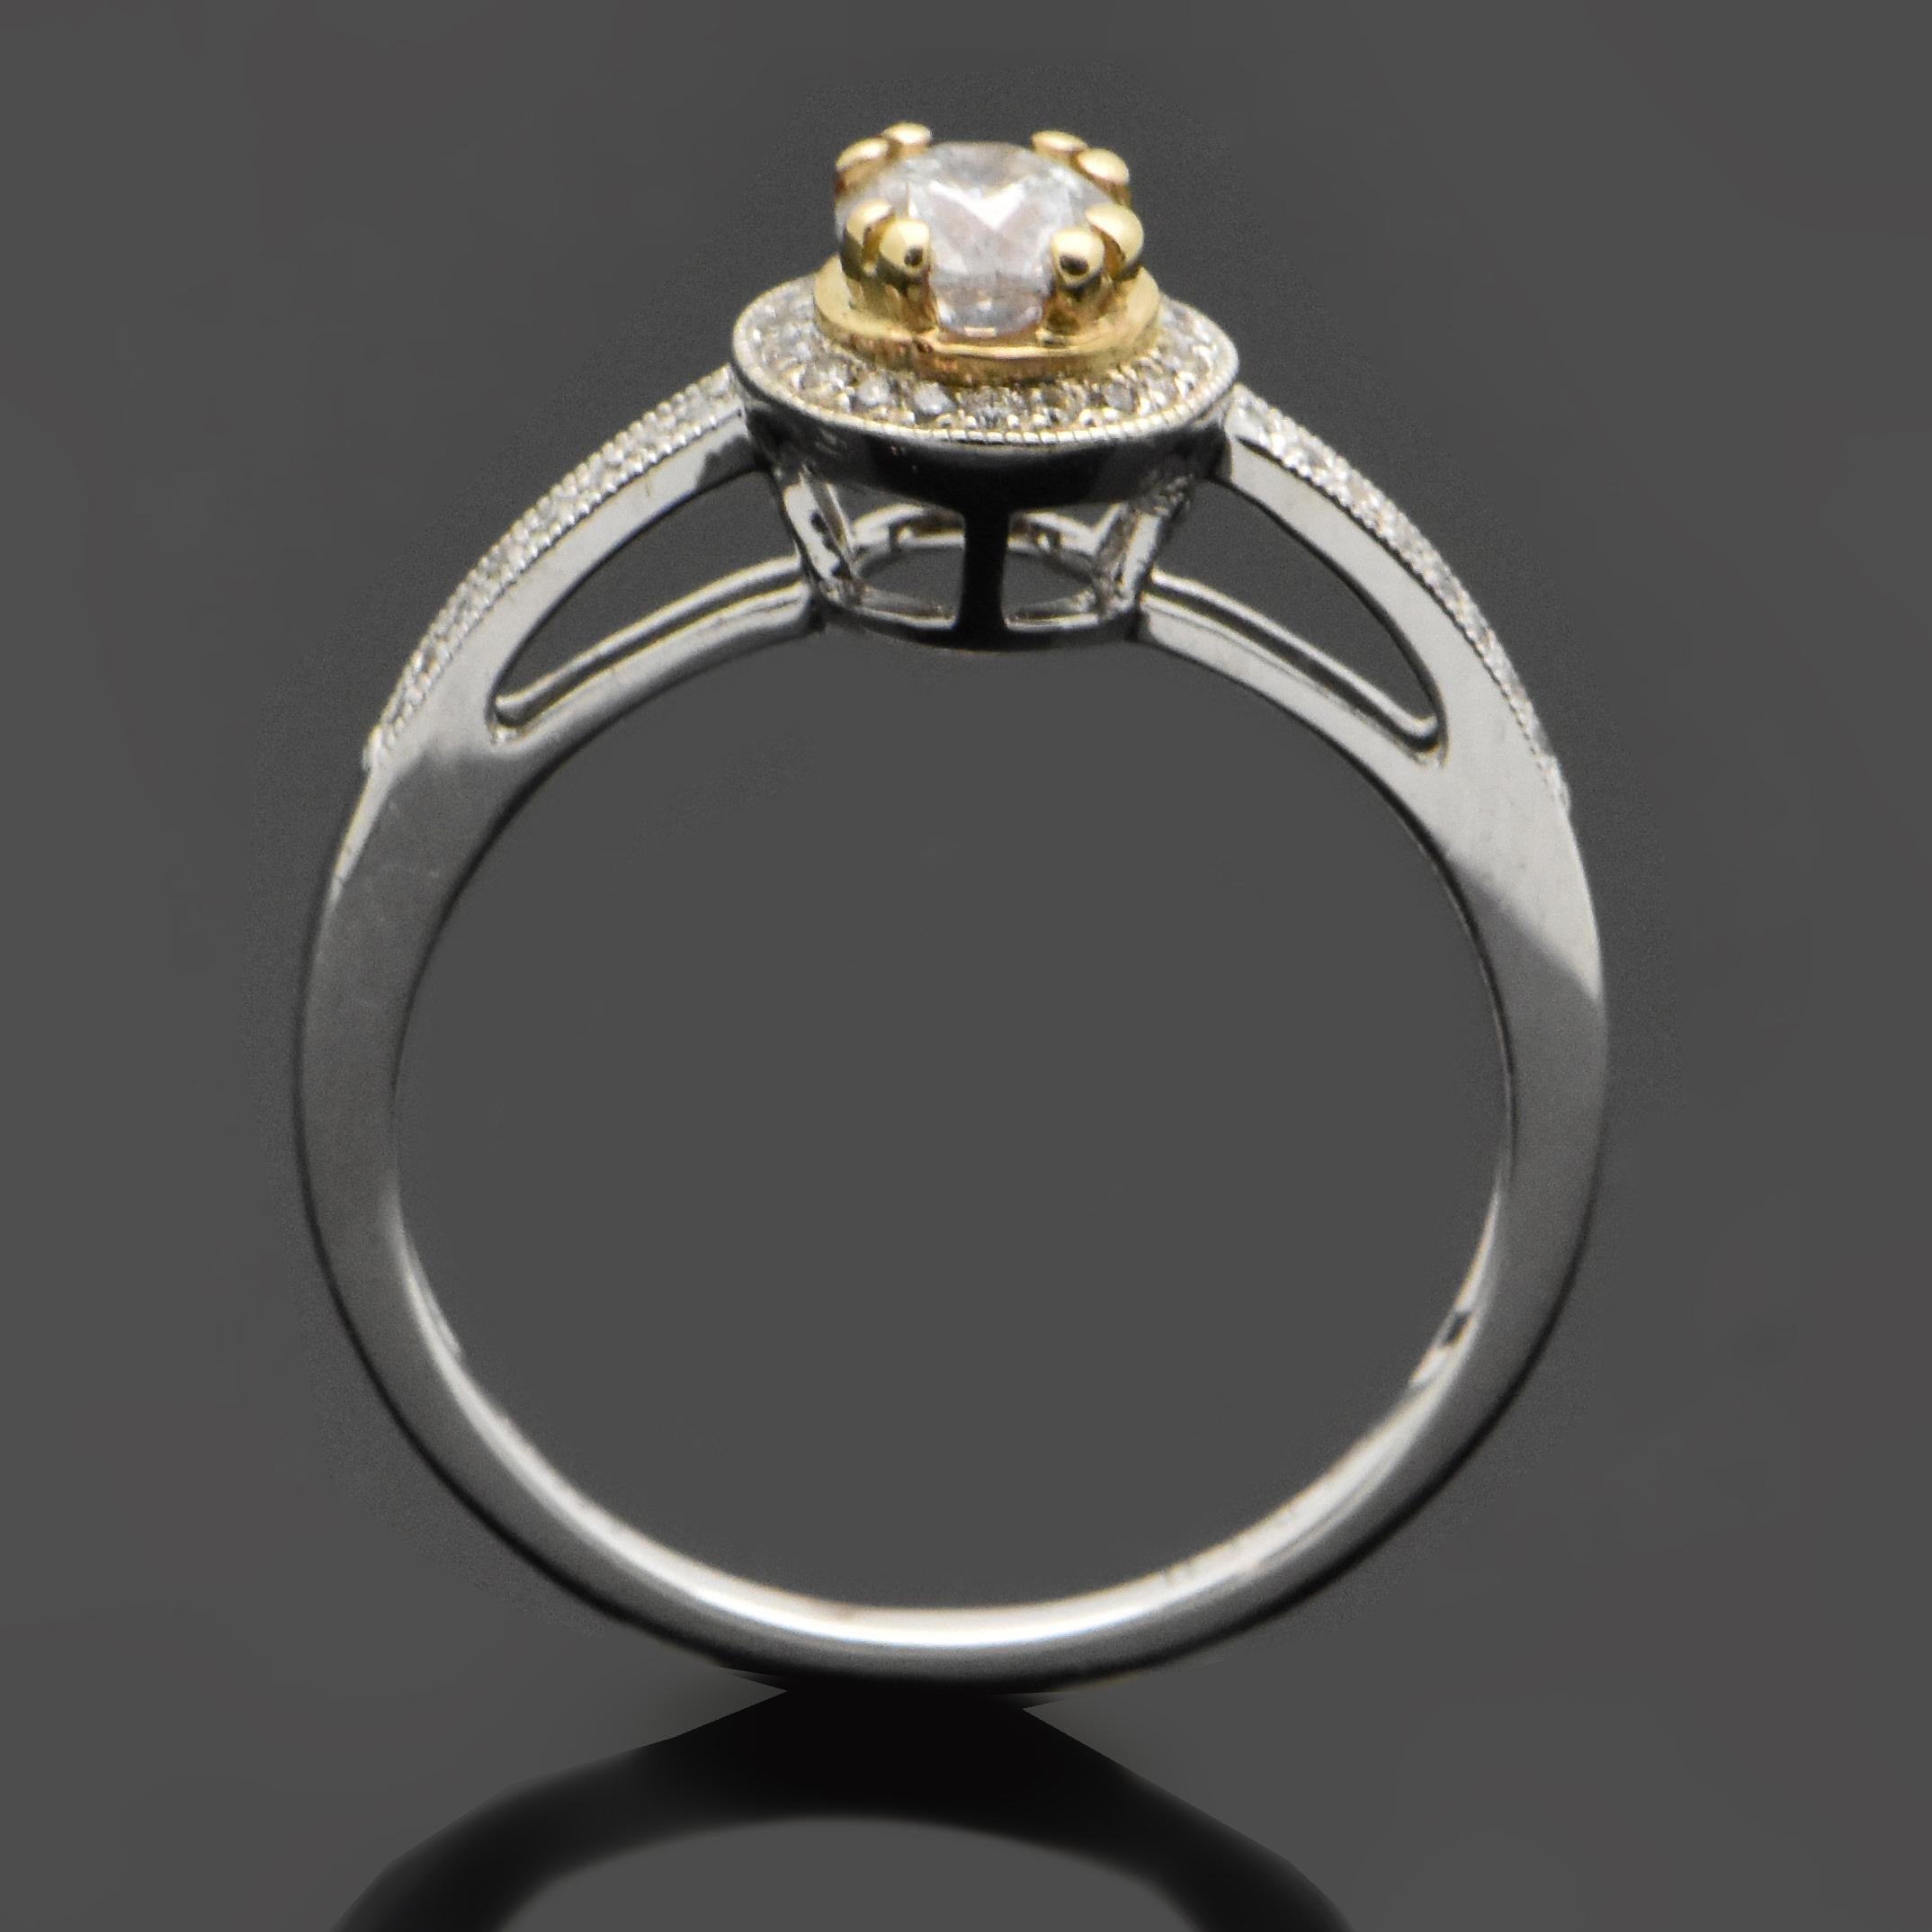 This ring features a 14kt white gold band and a center diamond at an estimated weight of 0.36ct in a yellow gold setting with double prongs. Diamonds in halo and down each shank are an estimated 0.11 cttw. Estimated weight of gold is 2 gr. 

We will